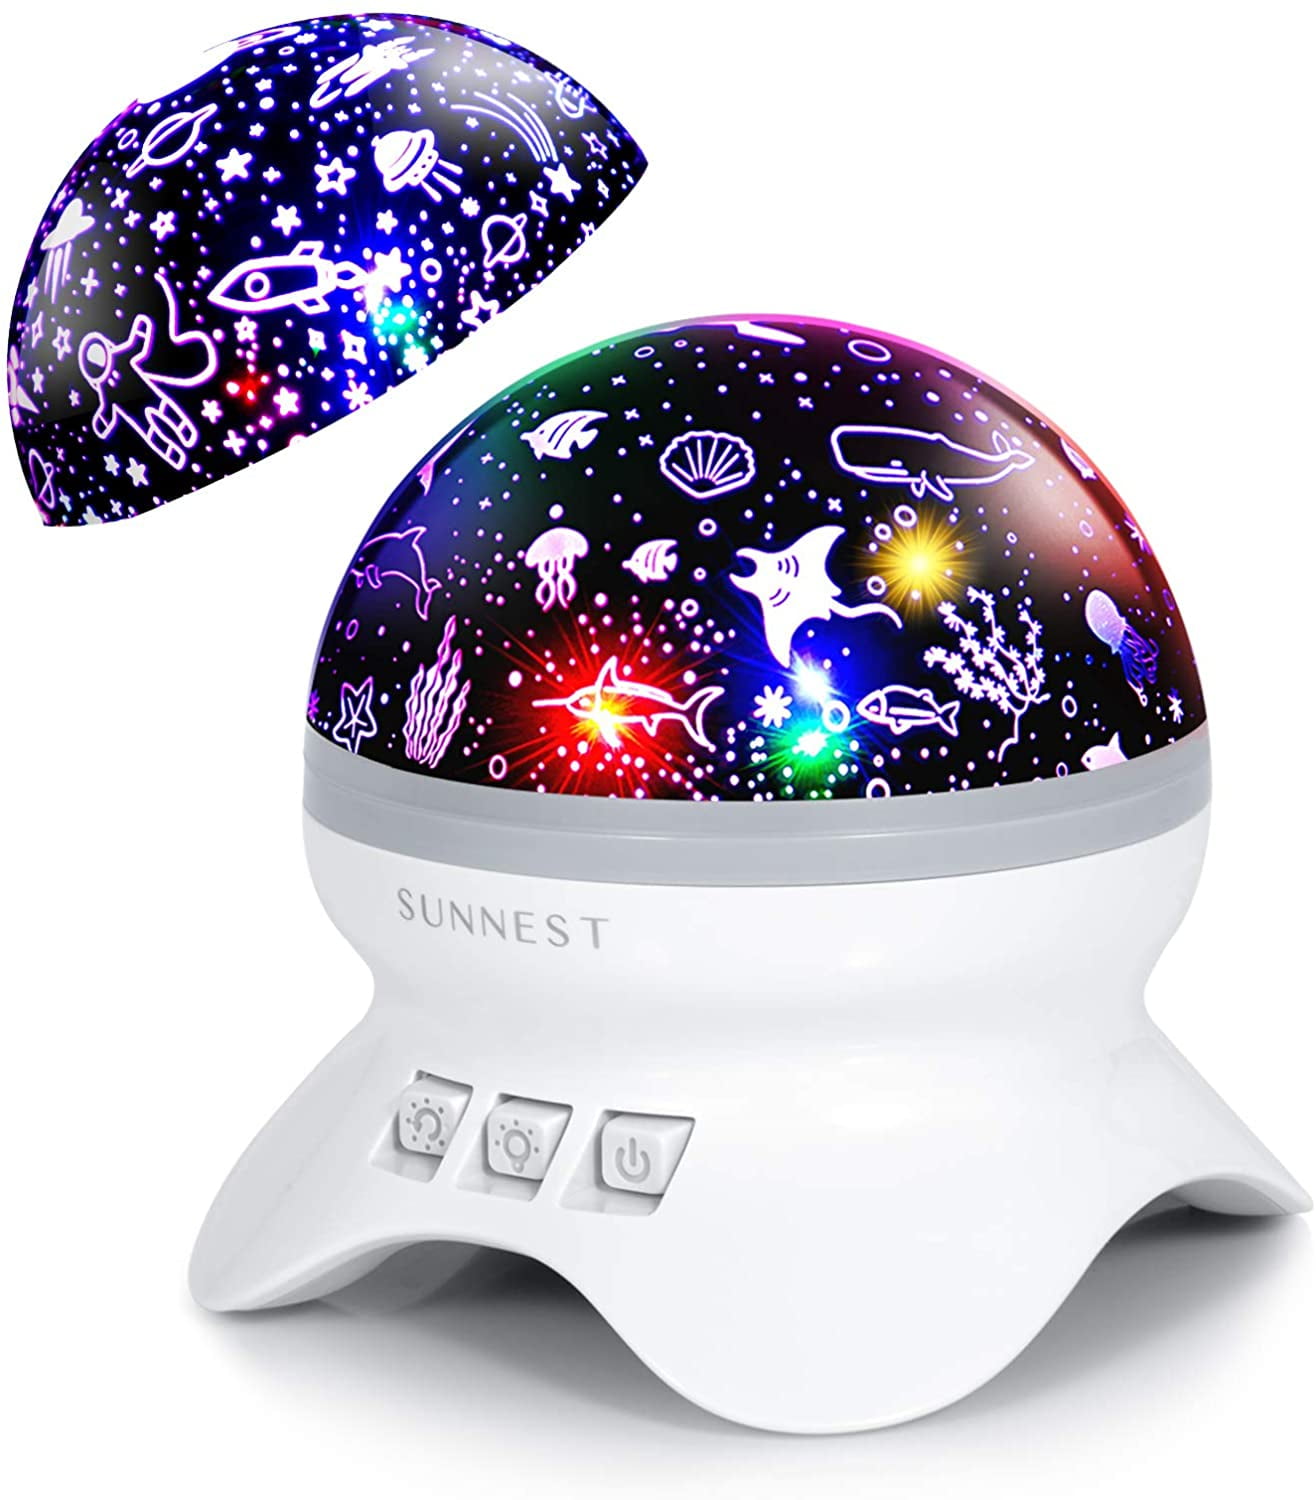 Night Light for Kids, 2 in 1 Baby Night - Space and Themes Projector 360 Degree Rotation Star Projector - 4 LED Bulbs Light Color Changing, Gifts Children Bedroom Birthday Party - Walmart.com